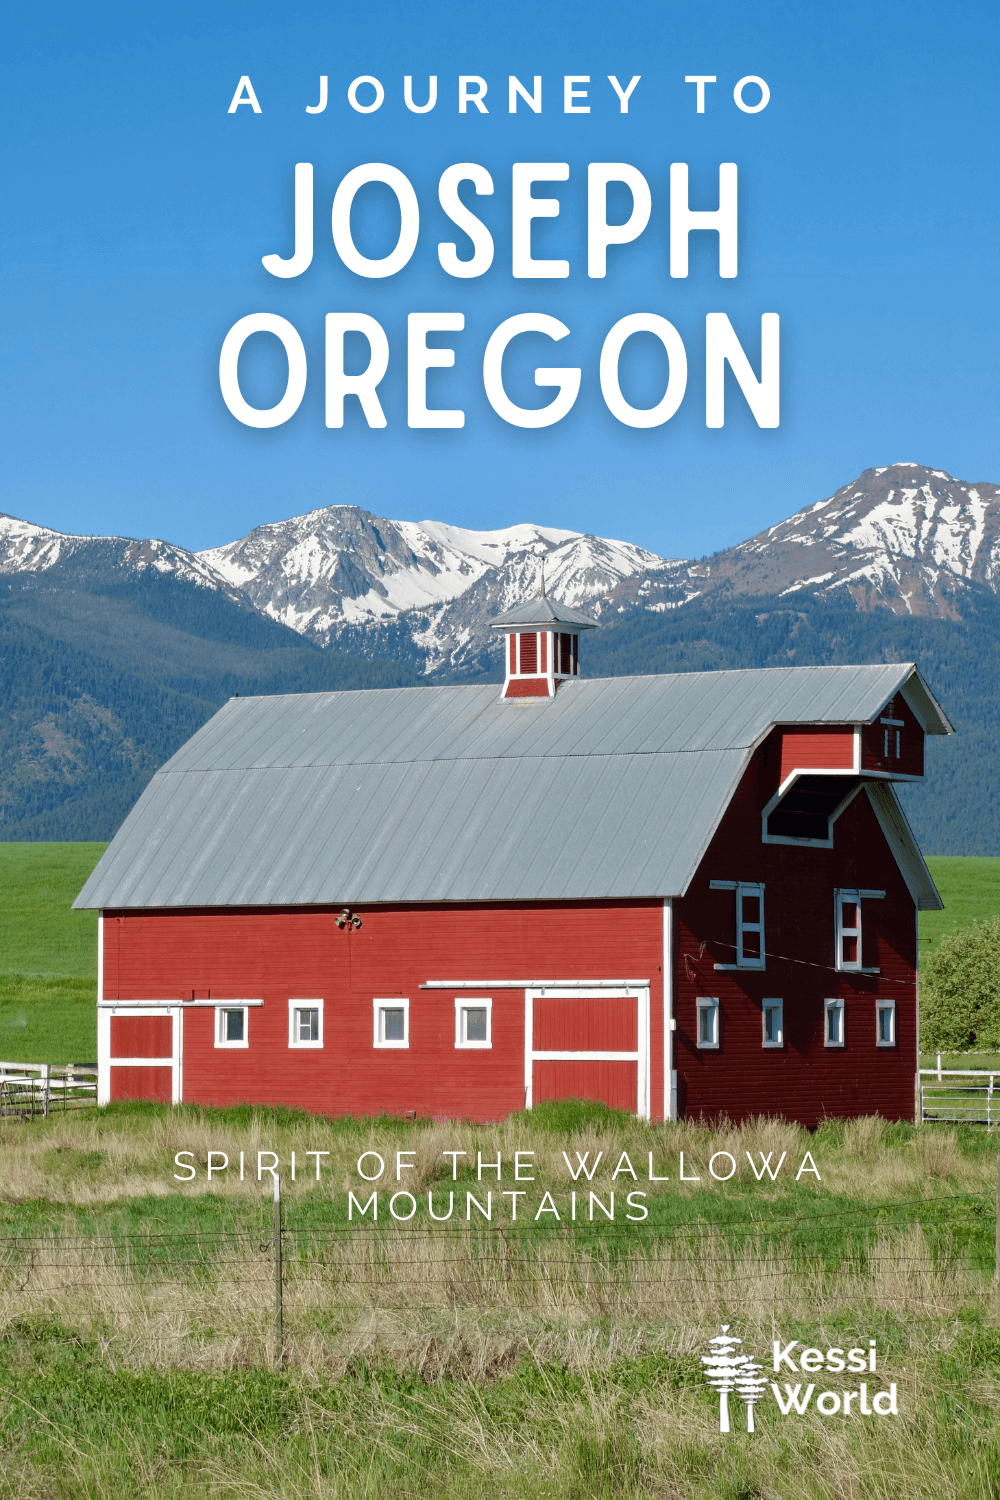 A Pinterest Pin highlighting the article about Journey to Joseph, Oregon, Spirit of the Wallowas. A red barn is prominent on the skyline below bright snow-capped mountains under blue sky.